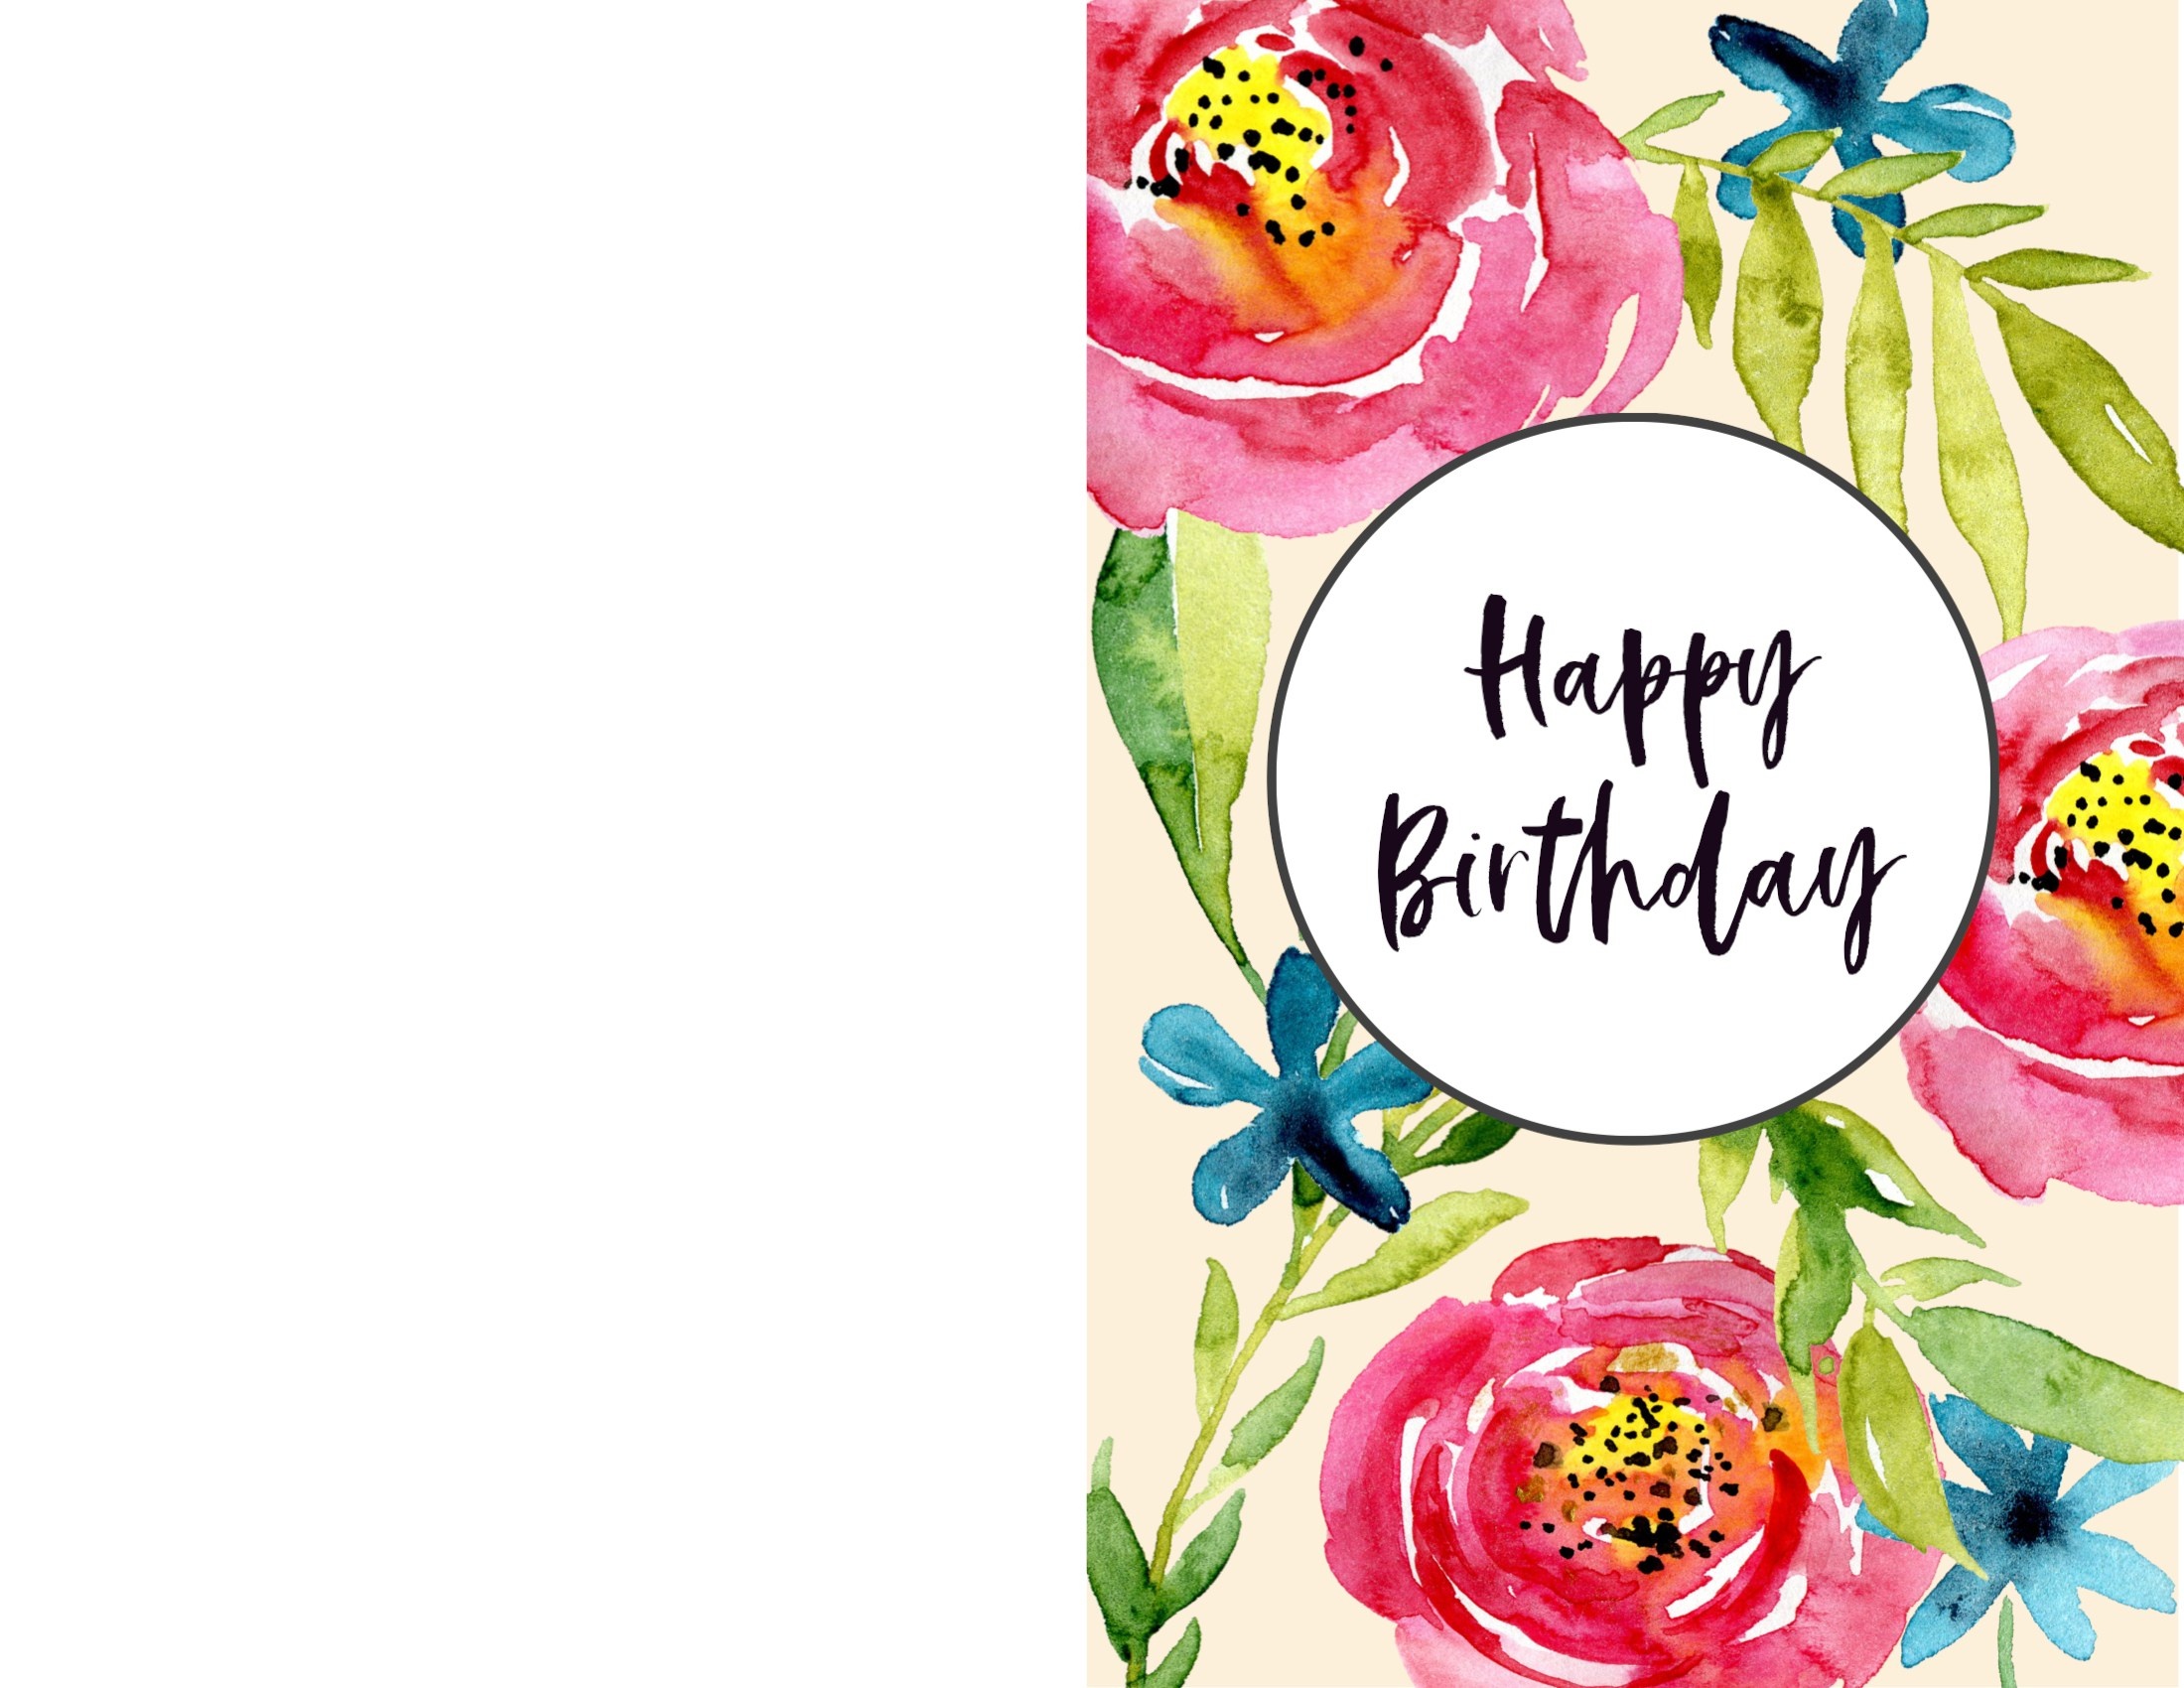 Free Printable Birthday Cards - Paper Trail Design - Free Printable Bday Cards